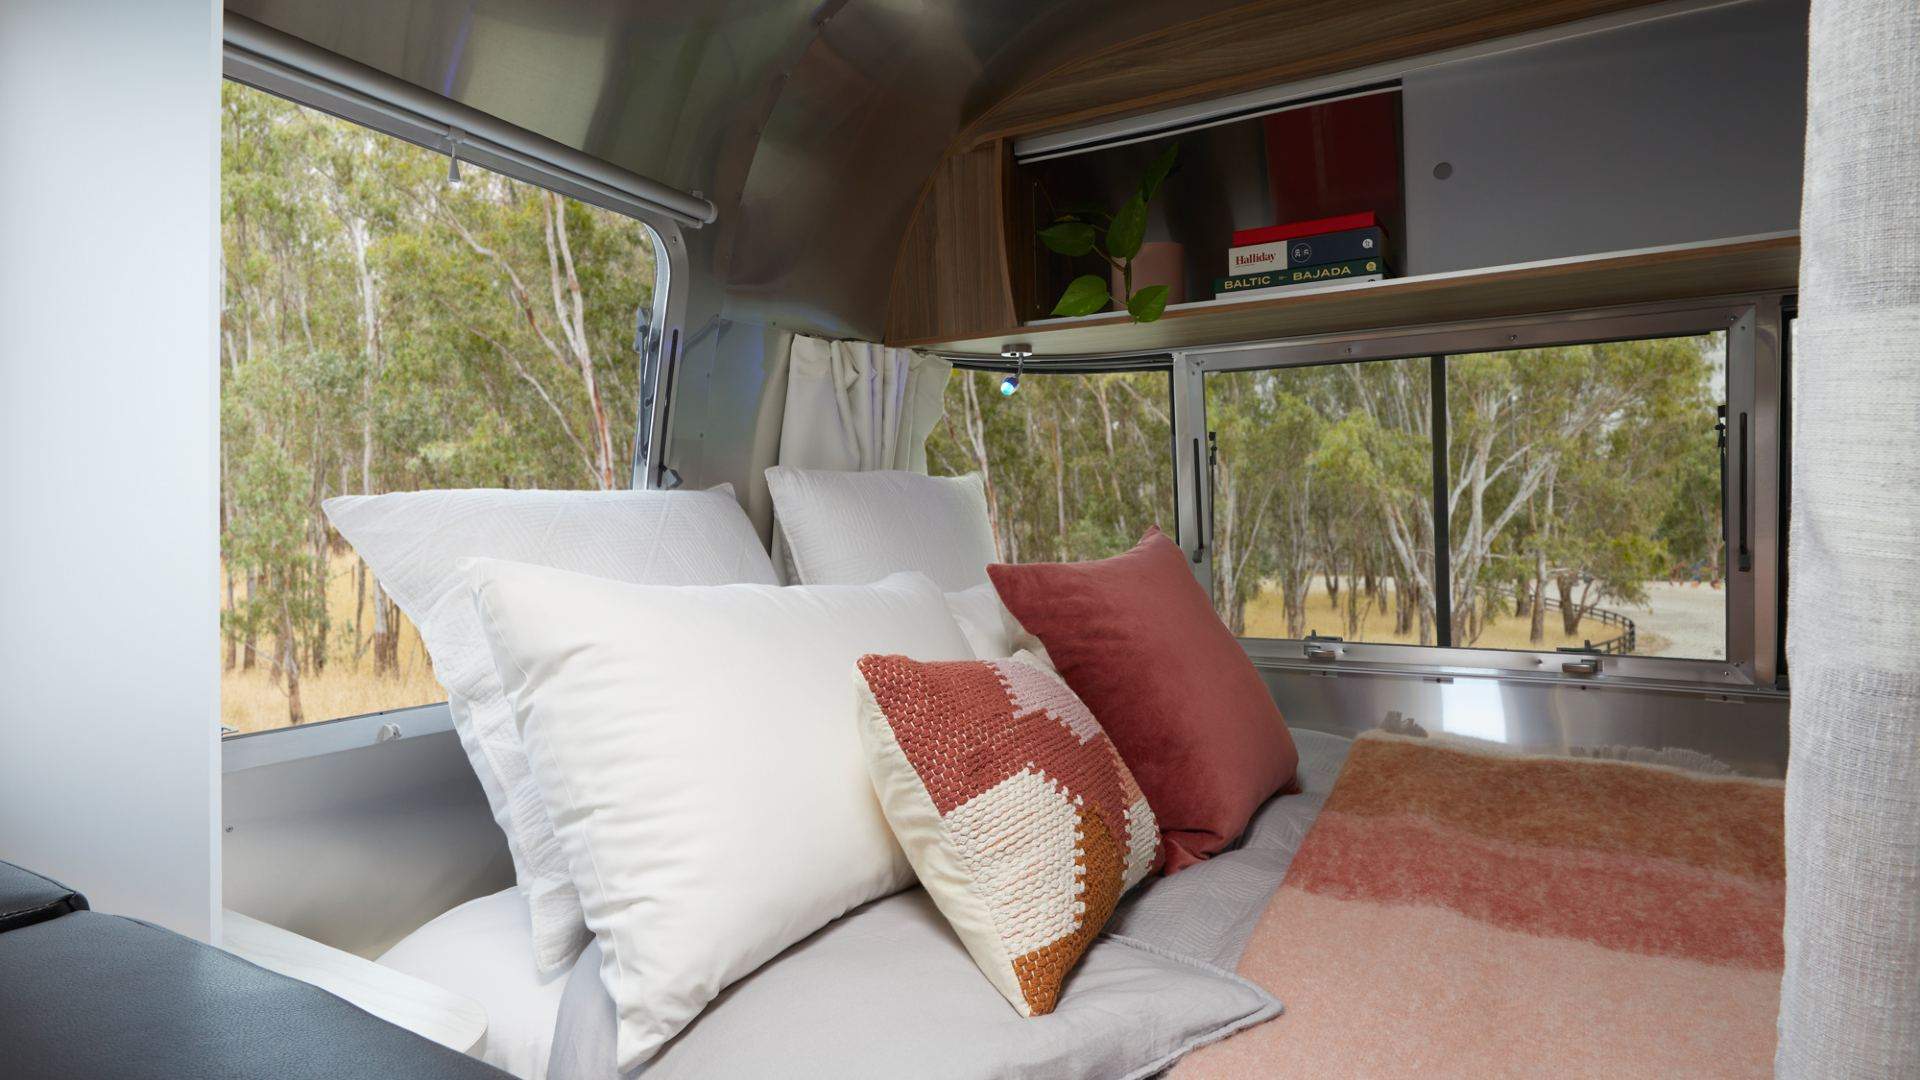 An Airstream Hotel Has Rolled Into Nagambie's Mitchelton Winery So You Can Sleep By the Vines